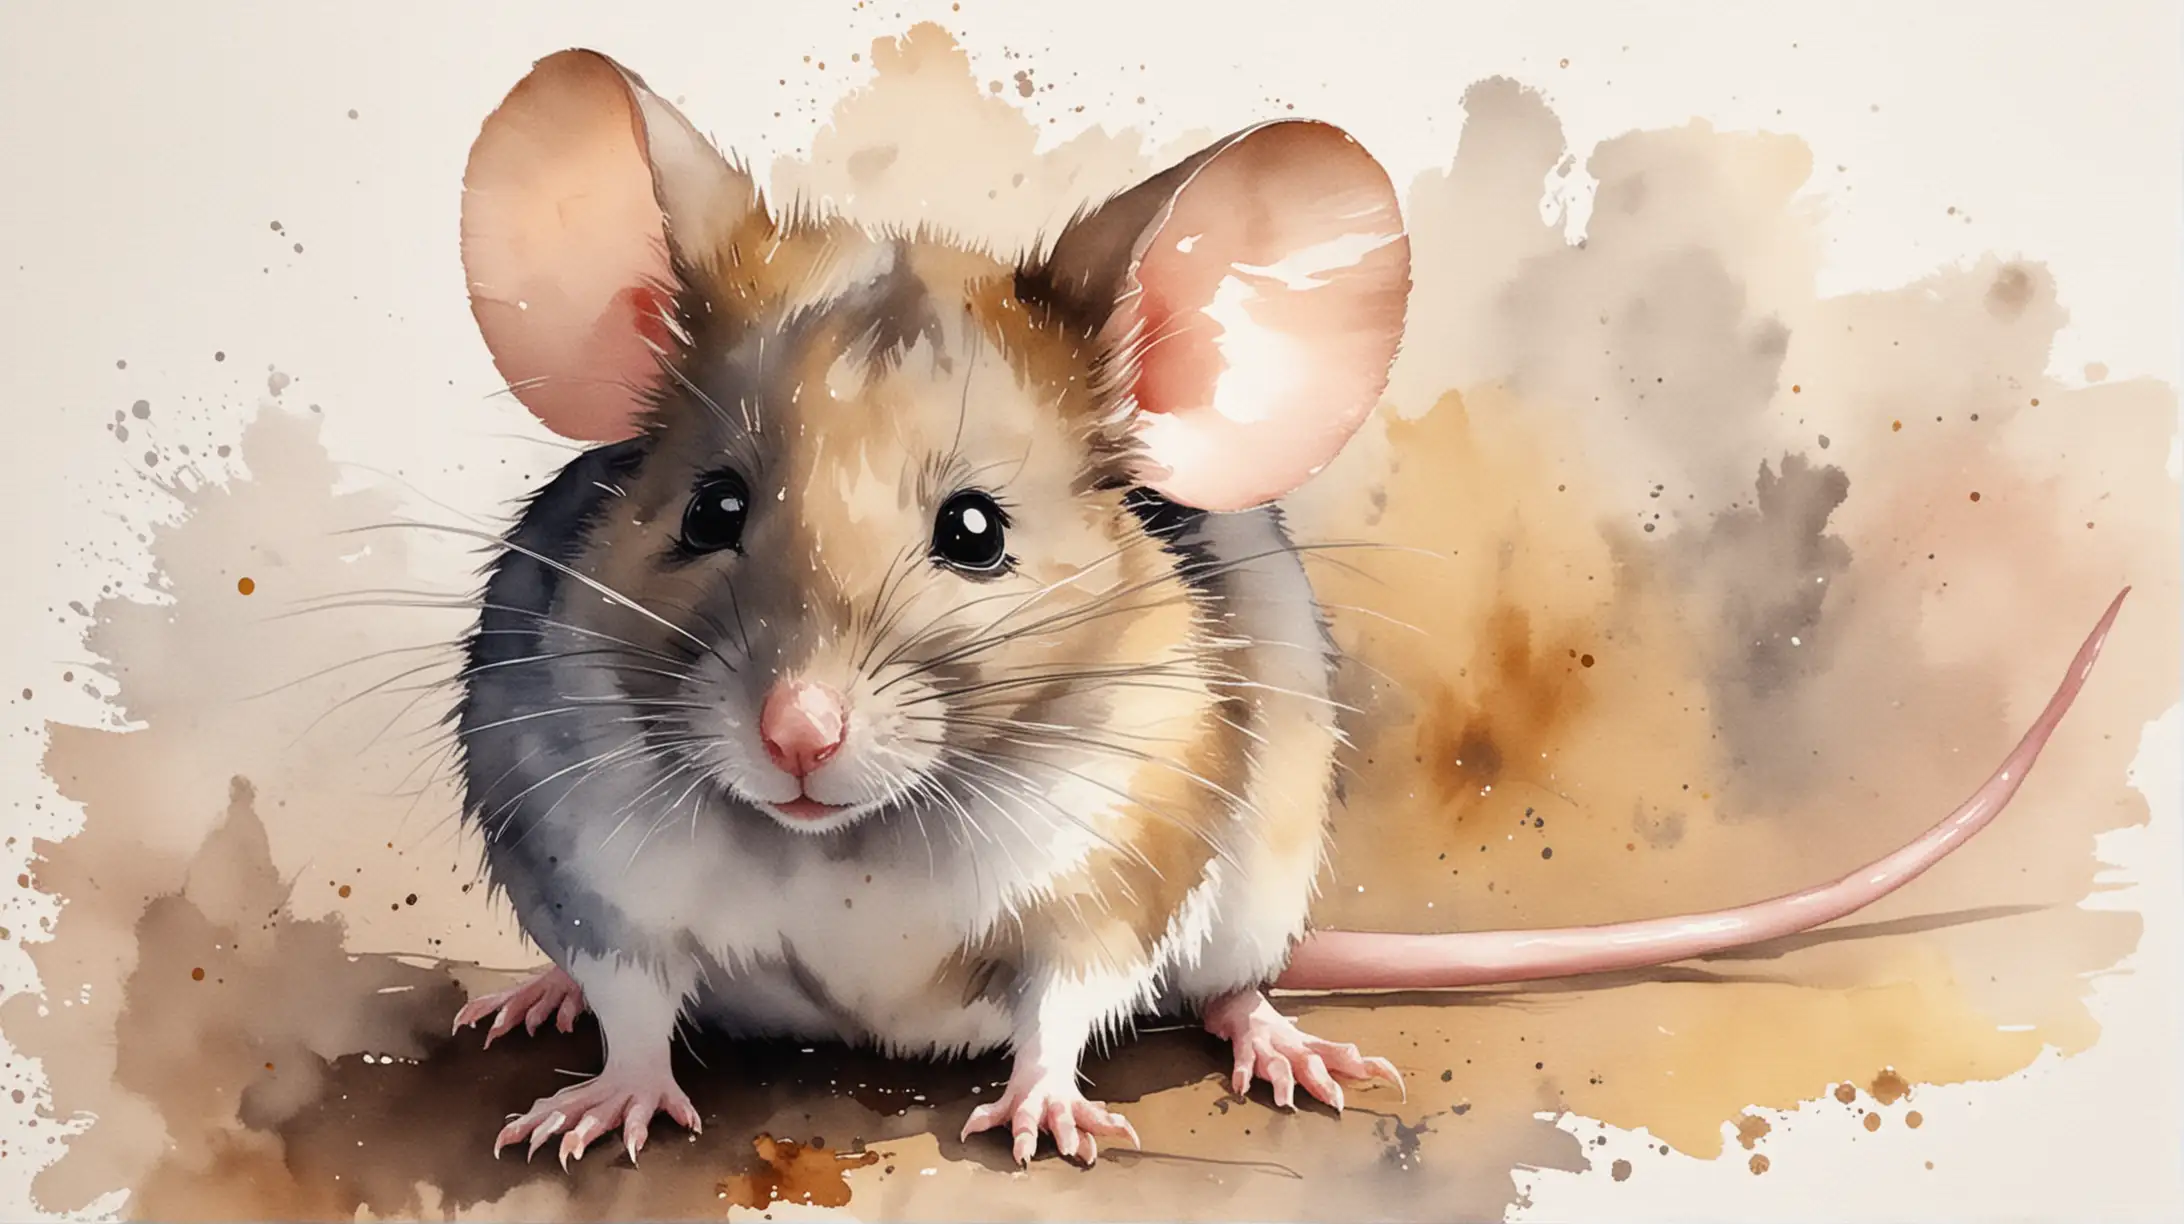 generate a painting in watercolor style about a mouse